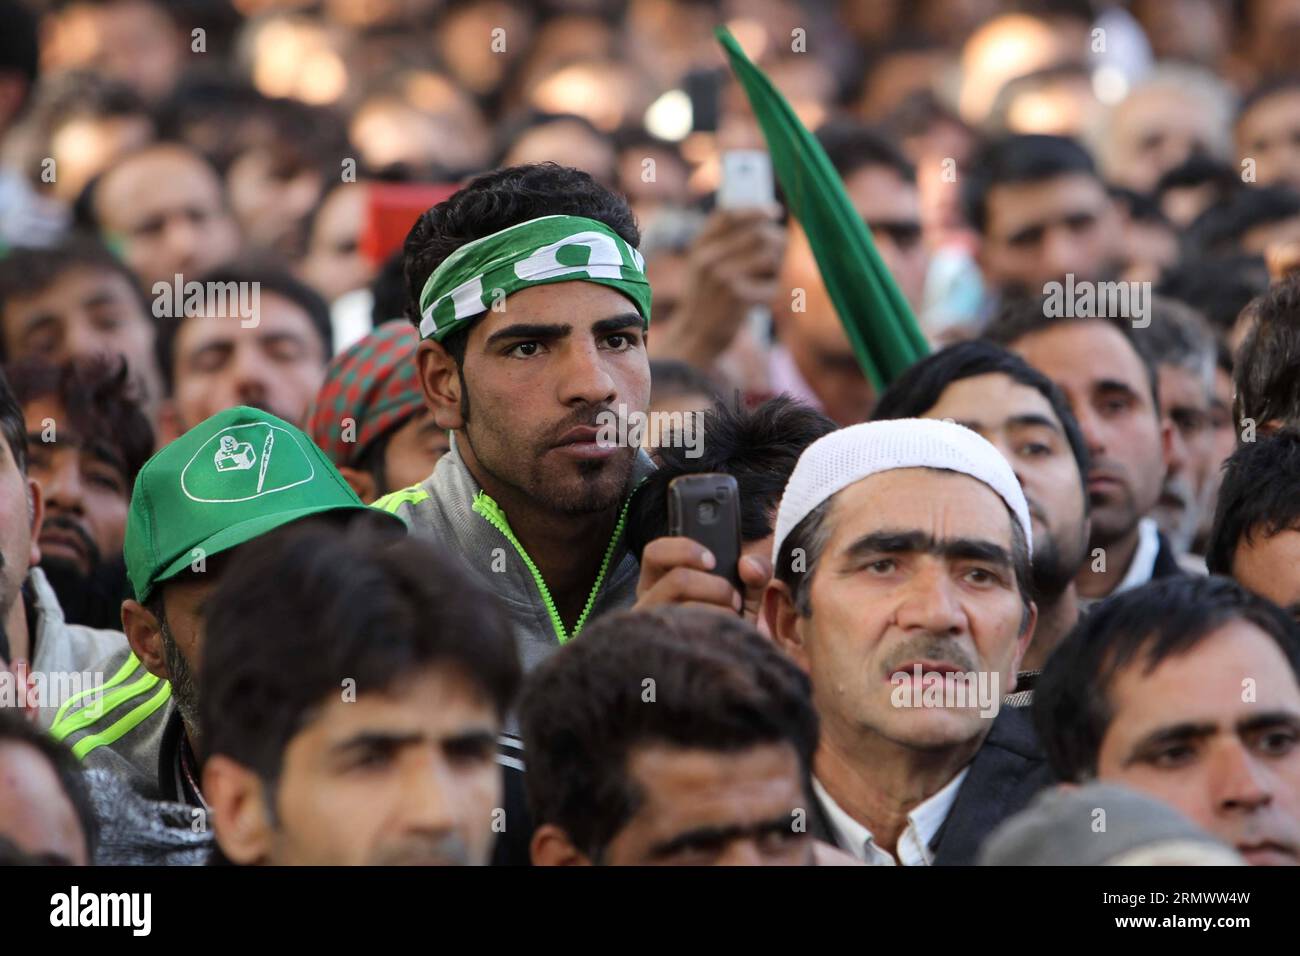 (141111) -- SRINAGAR, Nov. 11, 2014 -- Supporters of pro-India Peoples Democratic Party (PDP) attend an election campaign at Khanabal in Anantnag, about 52 km south of Srinagar city, the summer capital of Indian-controlled Kashmir, Nov. 11, 2014. Following the notification from India s election commission for local elections in Indian-controlled Kashmir, pro-India political parties have started election campaigns. ) KASHMIR-SRINAGAR-ELECTION JavedxDar PUBLICATIONxNOTxINxCHN   Srinagar Nov 11 2014 Supporters of pro India Peoples Democratic Party PDP attend to ELECTION Campaign AT  in Anantnag A Stock Photo